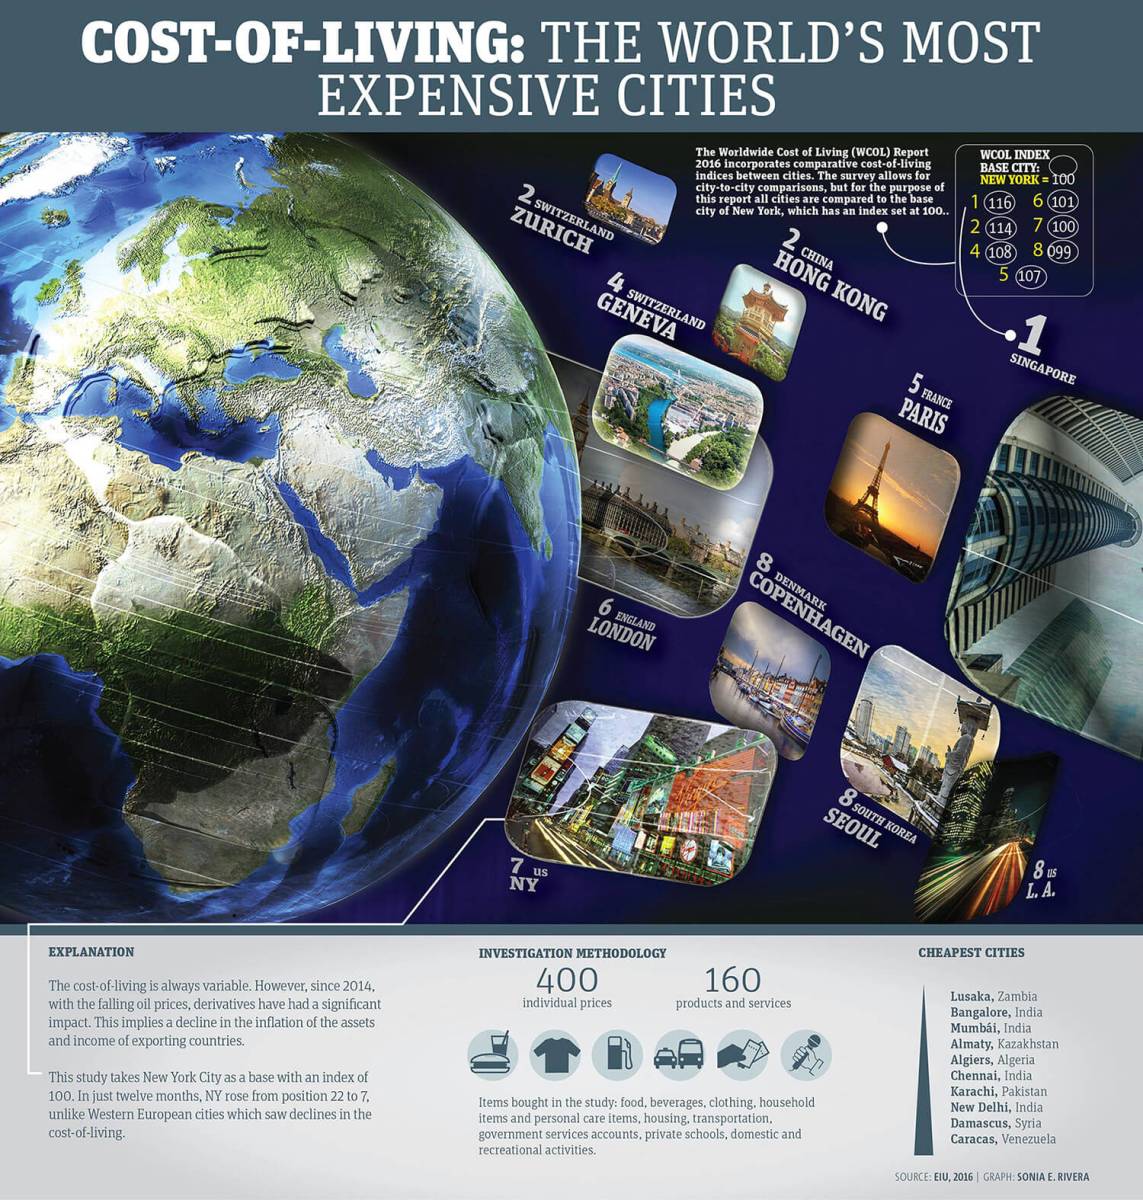 The most expensive cities in the world